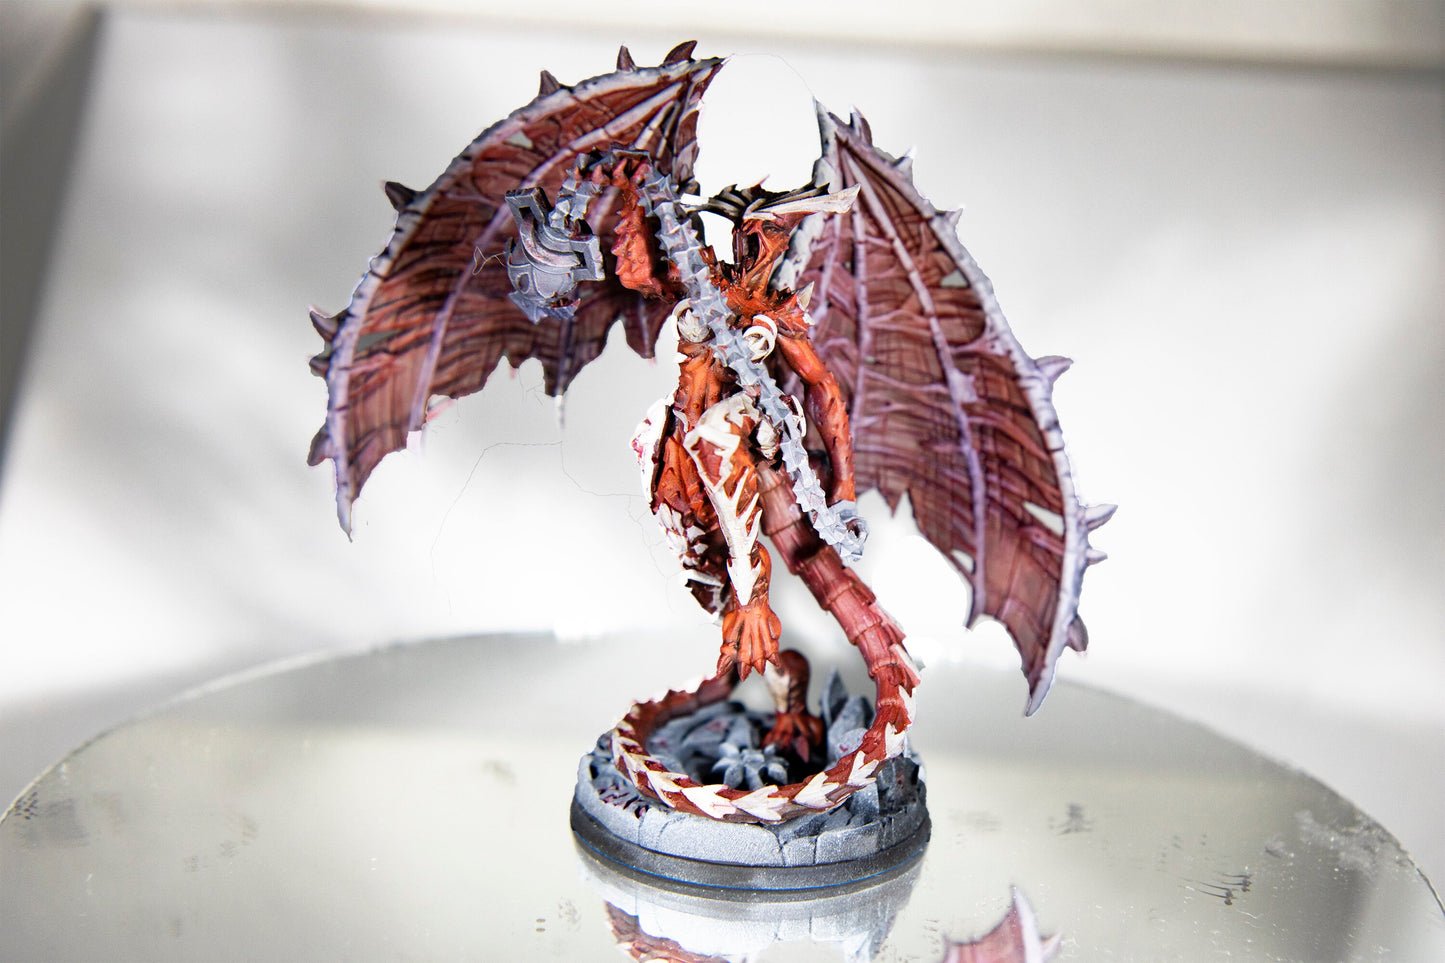 Agath, Mother of Evil - Cast n Play Printed Miniature | Dungeons & Dragons | Pathfinder | Tabletop